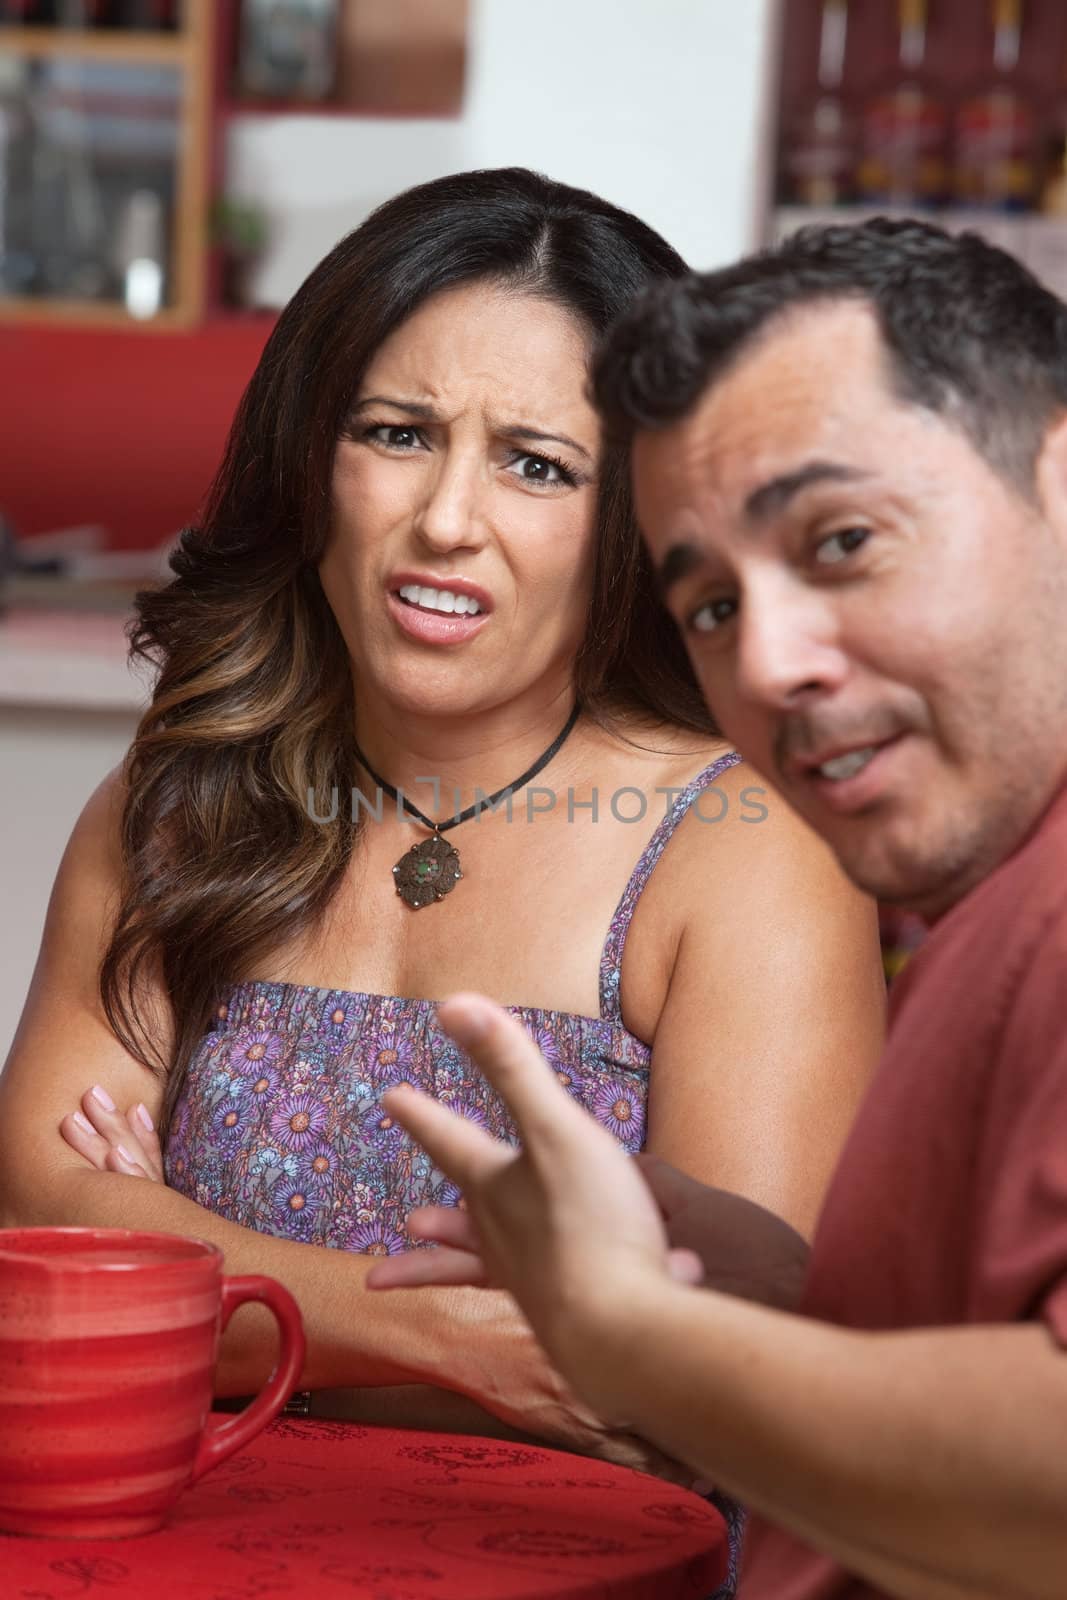 Disgusted Hispanic woman in cafe with man